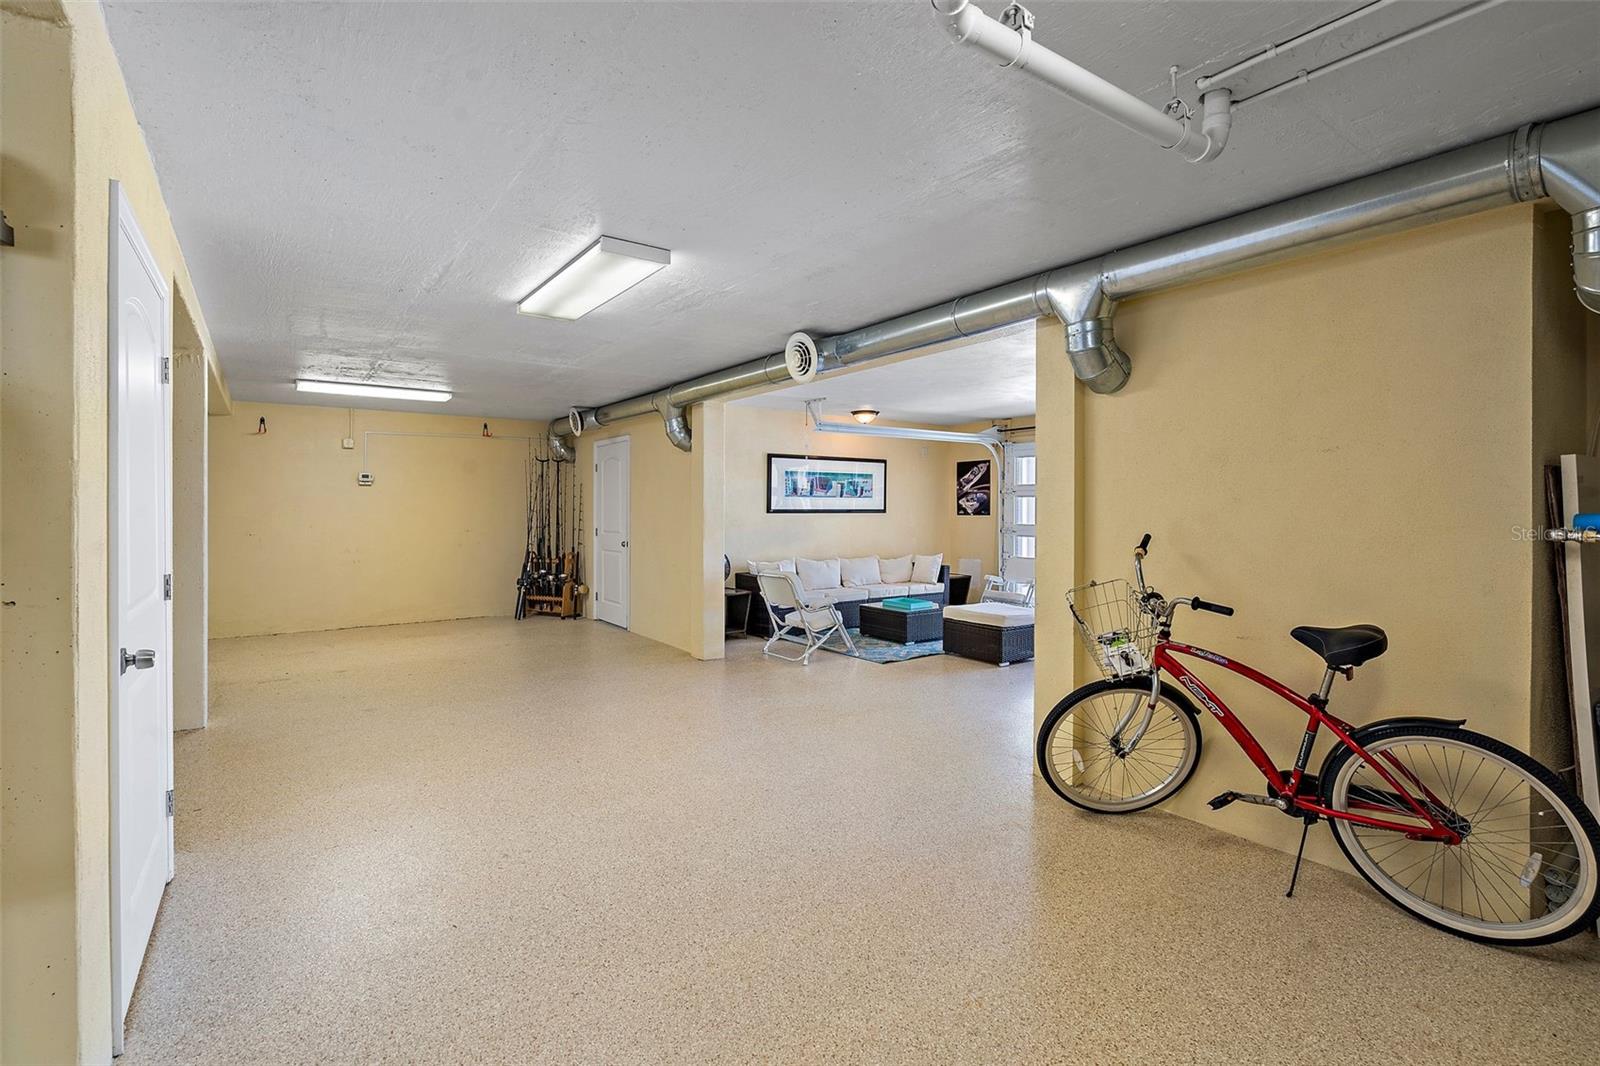 Garage space for a golf cart or multiple jet skis.